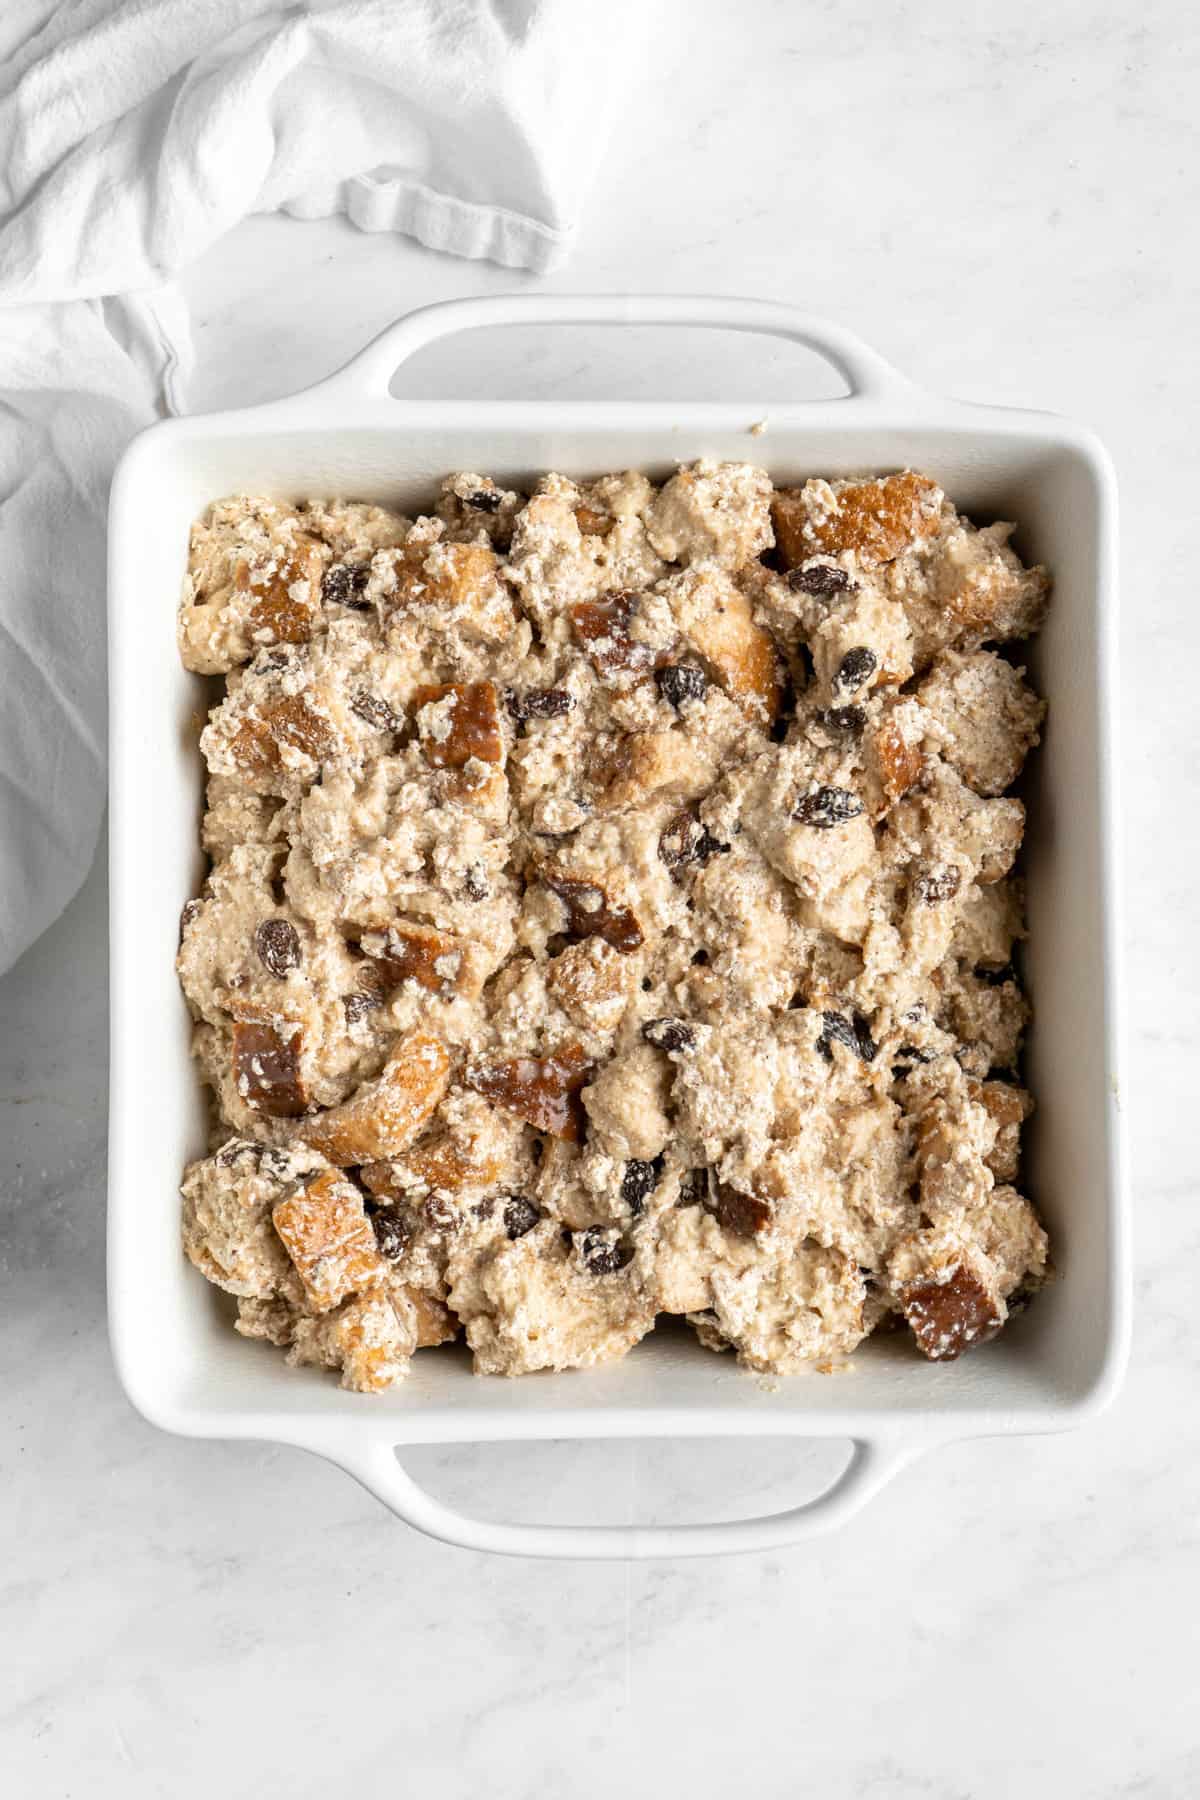 Unbaked bread pudding in a white square baking dish.